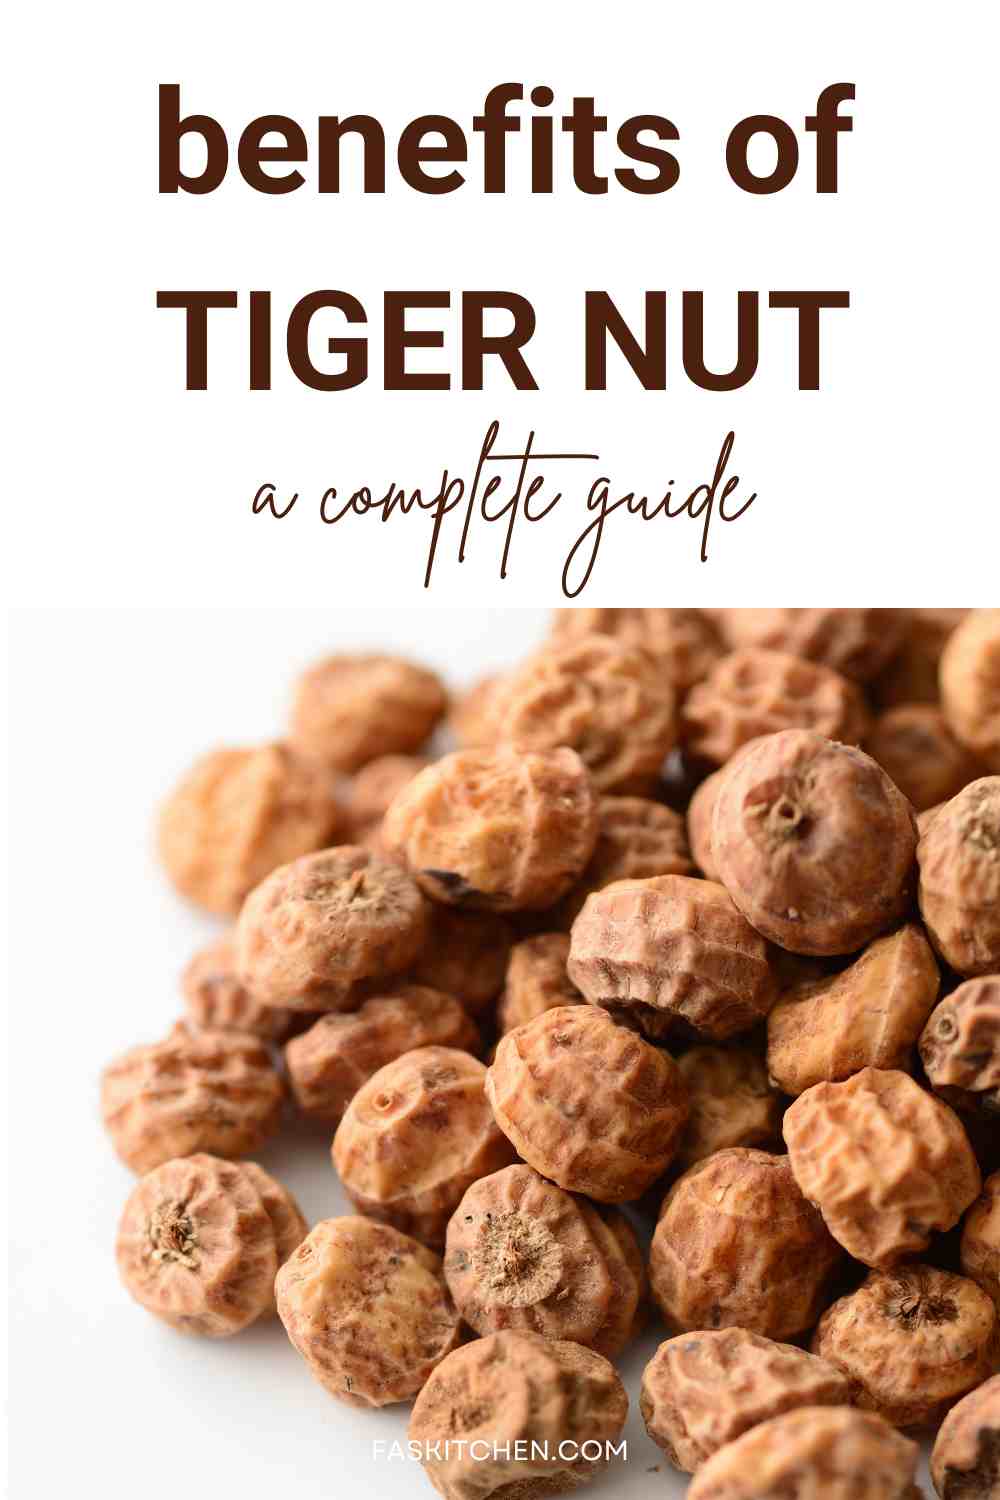 Tiger Nut 101: Nutrition, Benefits, How To Cook, Buy, Store A Complete  Guide - Fas Kitchen